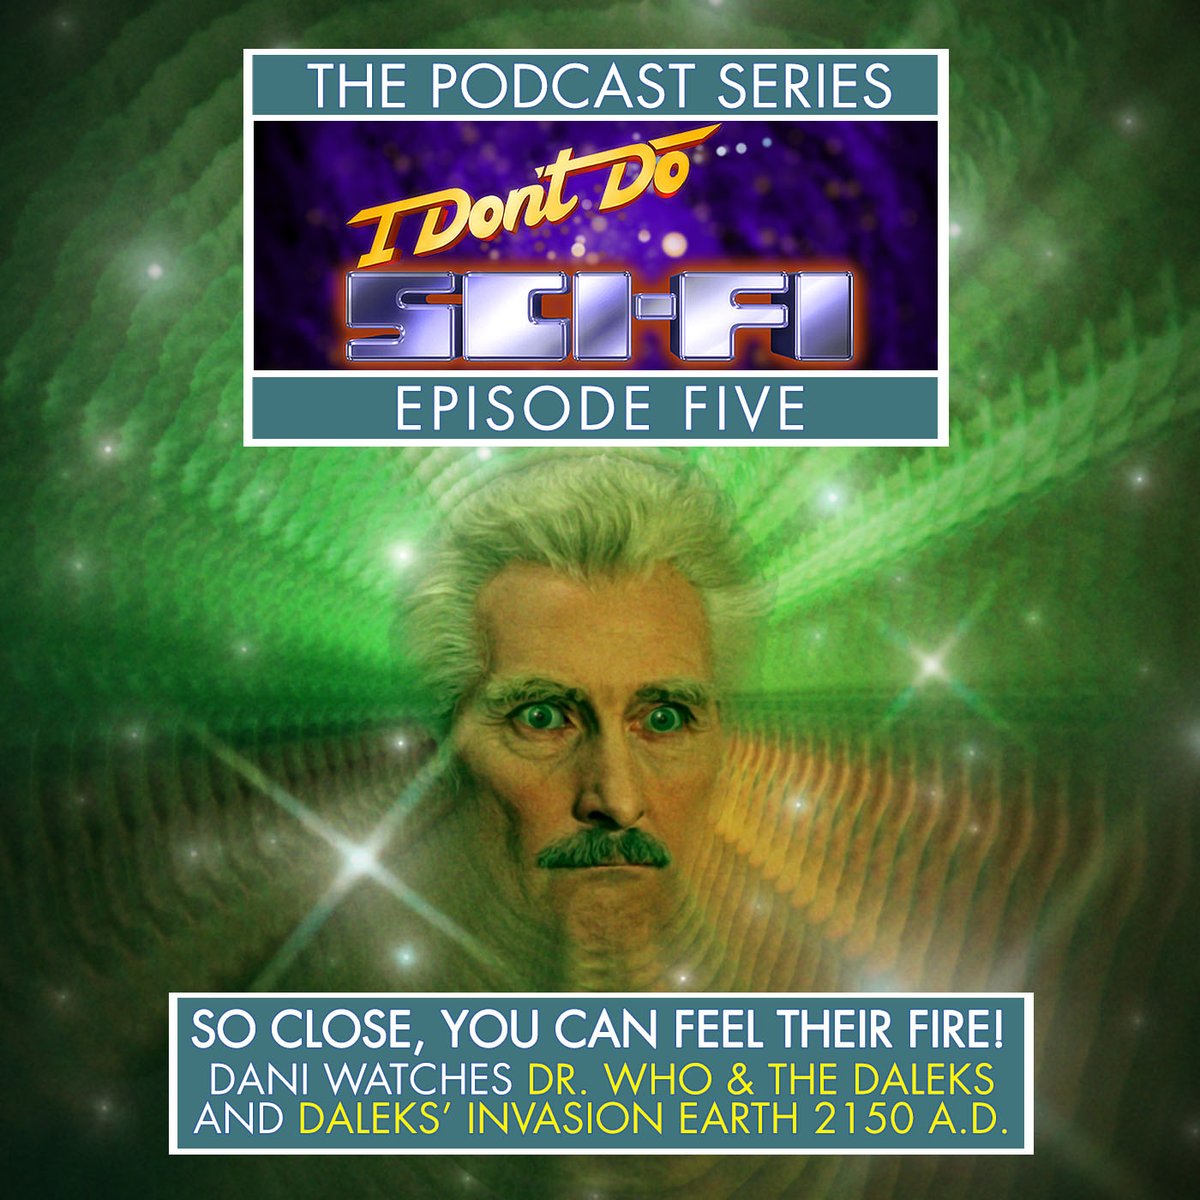 Time for a Saturday morning double-bill of #scifi #Dalek movies! co-host Dani discusses her experience of watching #PeterCushing as #DrWho for the first time, with our panel. anchor.fm/idontdoscifi
YouTube.com/@iddsf